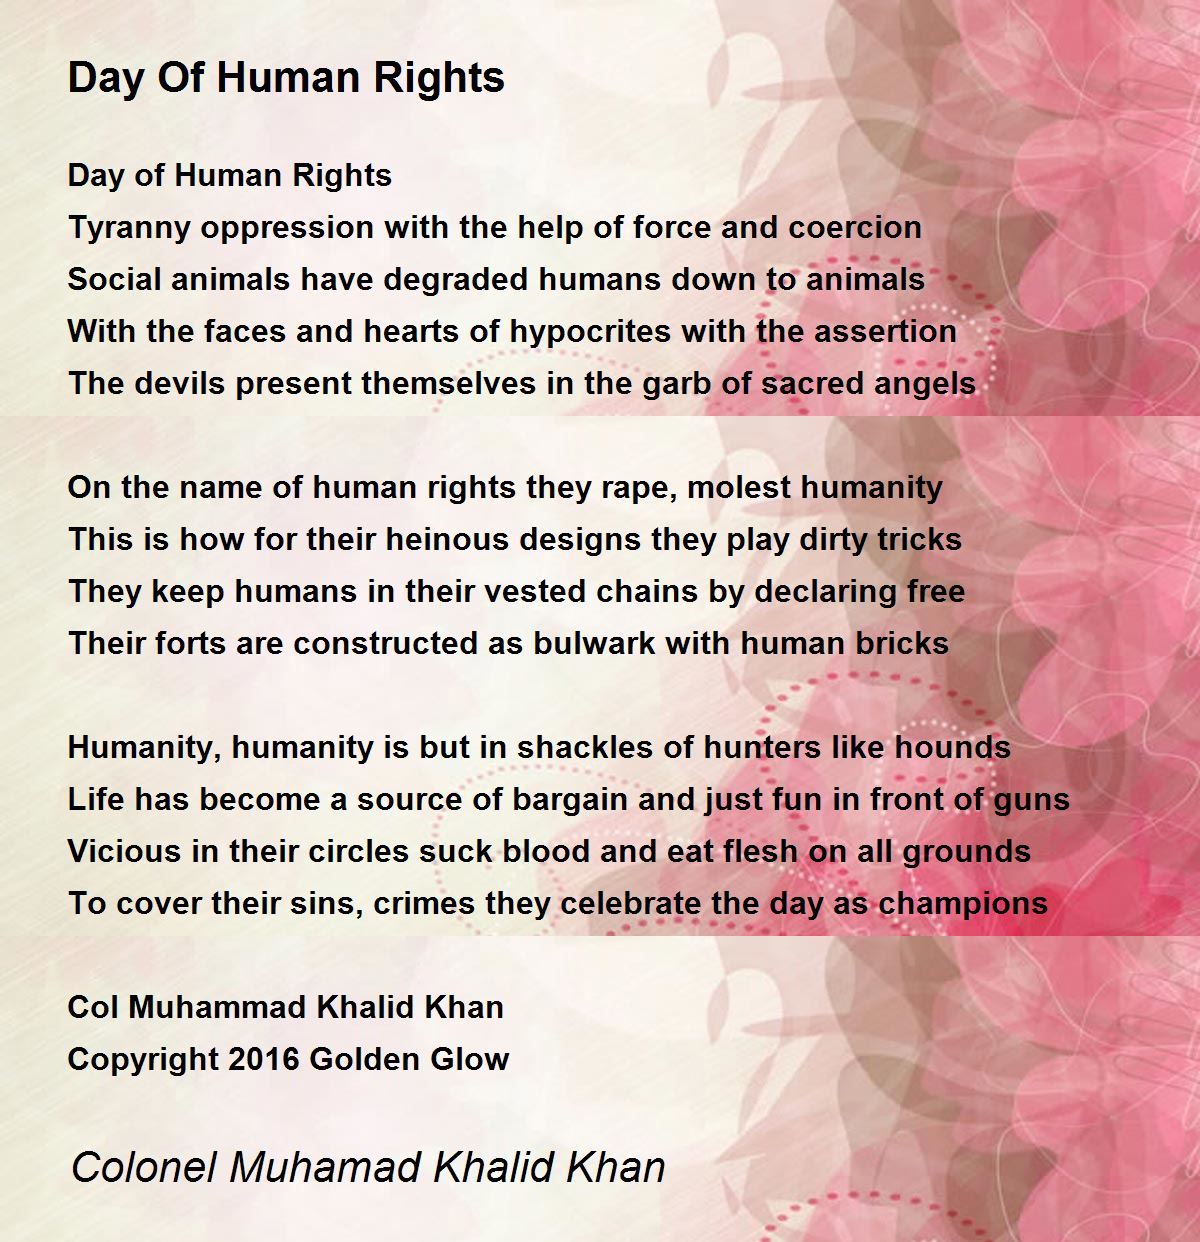 Day Of Human Rights - Day Of Human Rights Poem by Colonel Muhamad Khalid  Khan